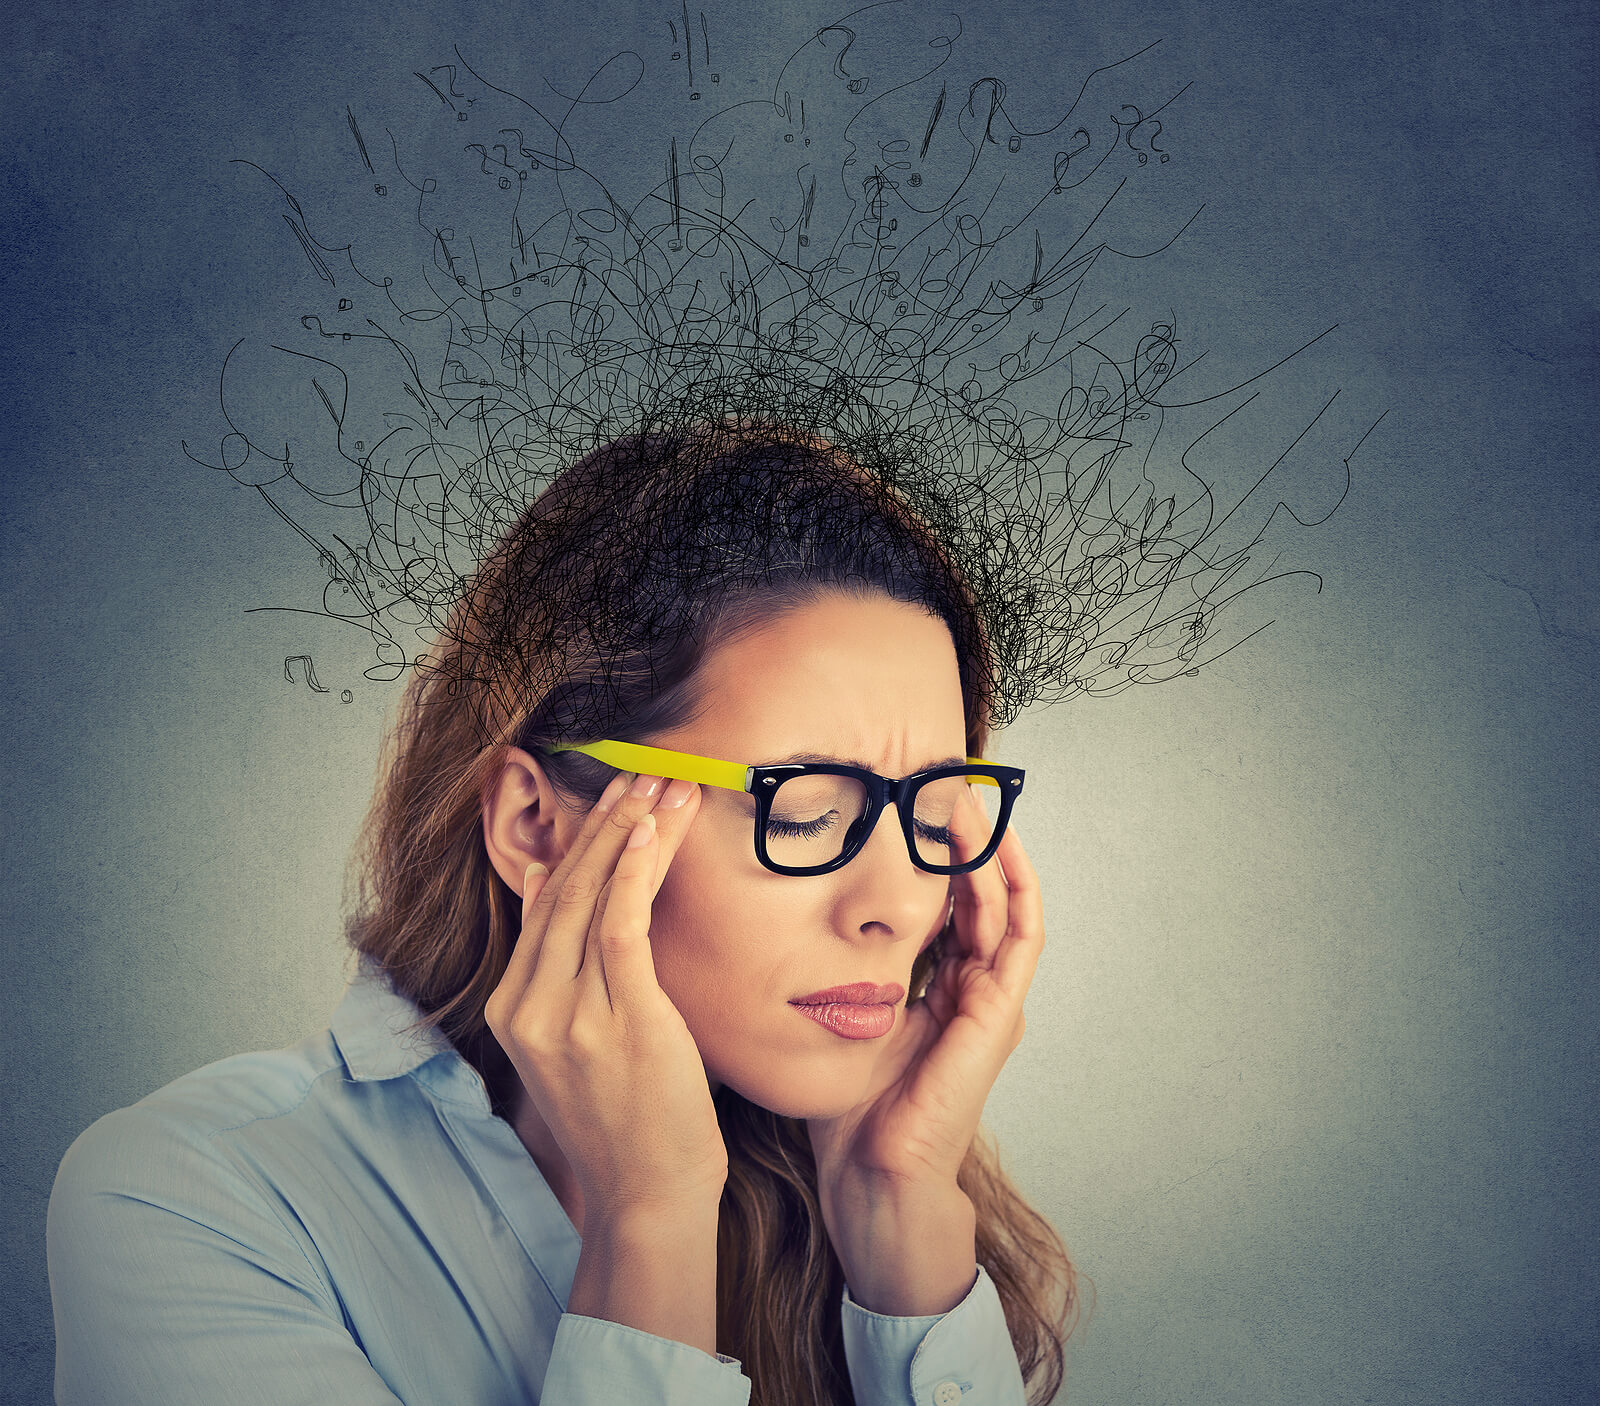 Woman feeling overwhelmed with racing thoughts related to ADHD. Feeling like your life is spinning out of control? Racing thoughts and inability to focus can by symptoms of ADHD. Get the answers you need with ADHD testing in NYC.